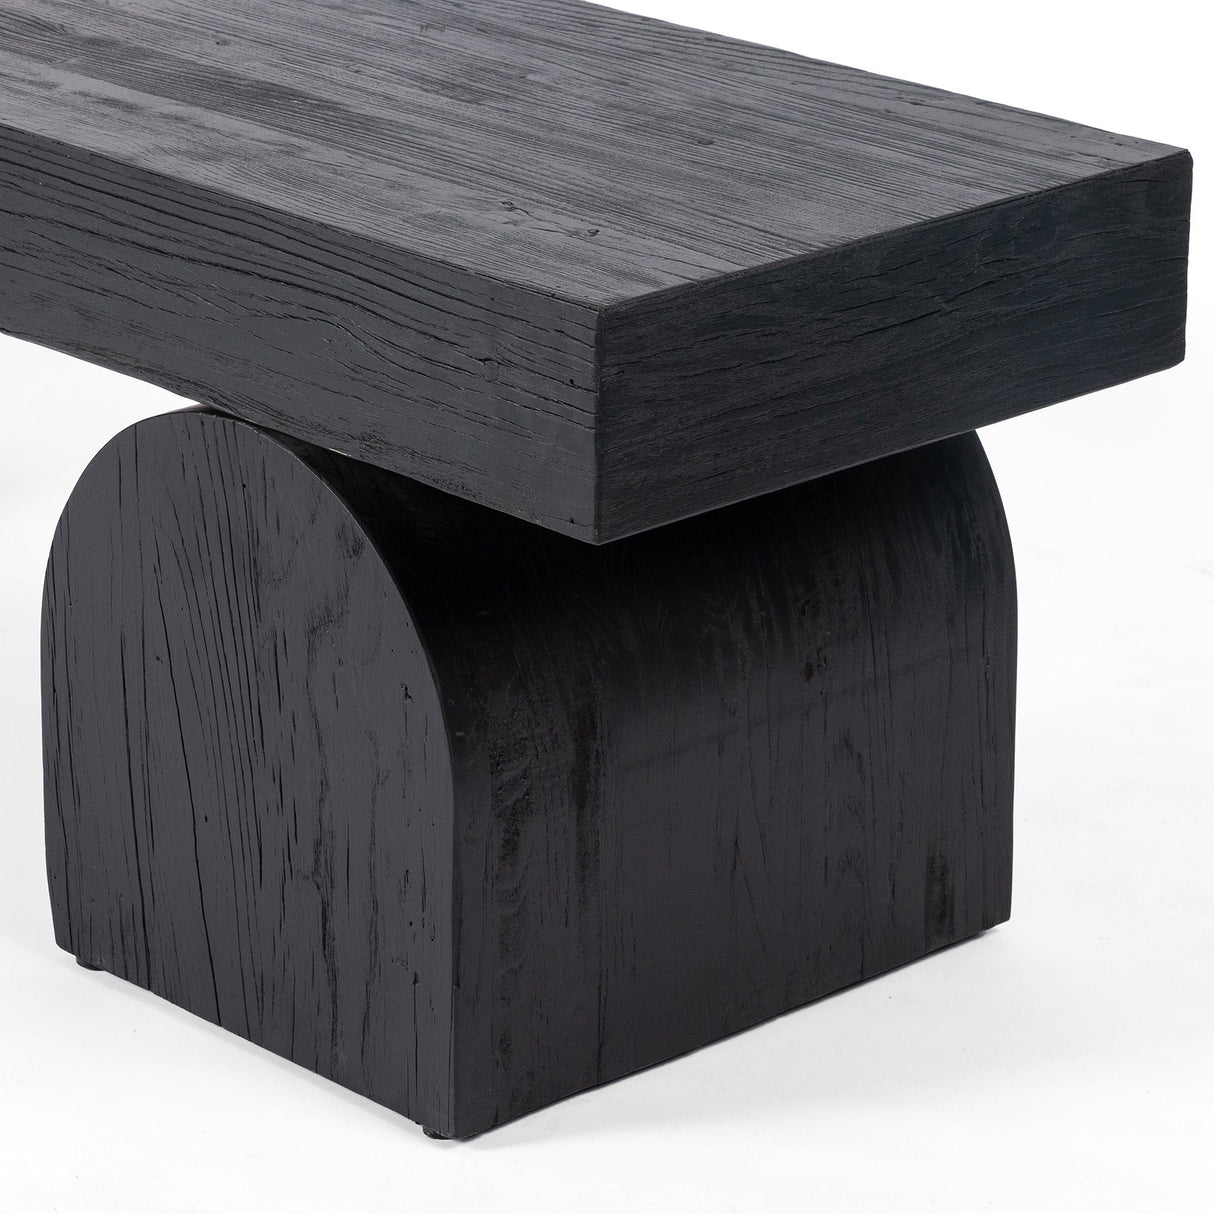 Four Hands Keane Bench Furniture